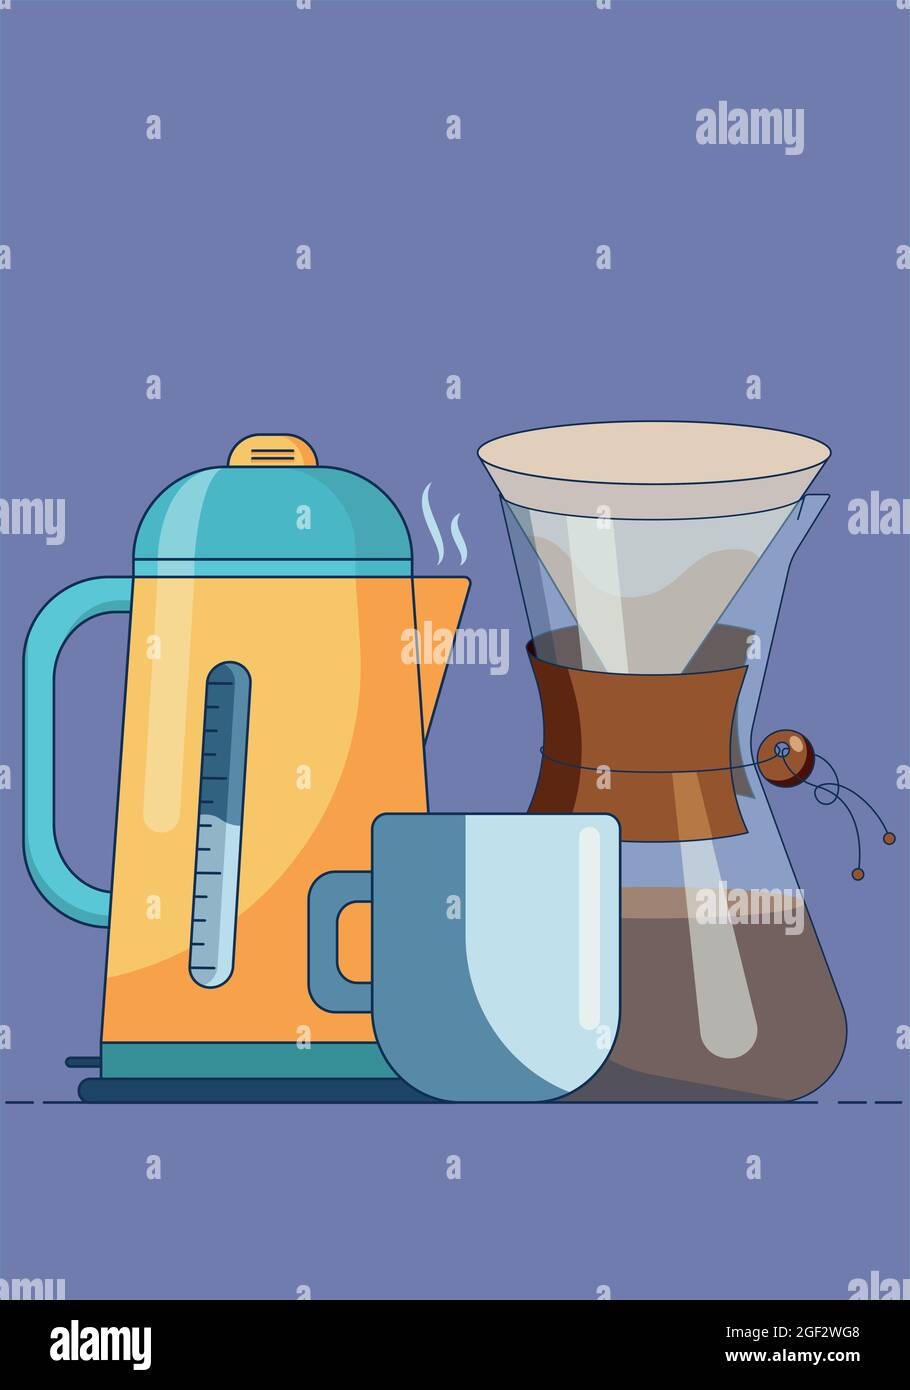 https://c8.alamy.com/comp/2GF2WG8/mug-with-hot-coffee-jug-filter-bags-and-electric-kettle-cartoon-vector-illustration-in-a-flat-style-isolated-on-a-purple-background-2GF2WG8.jpg